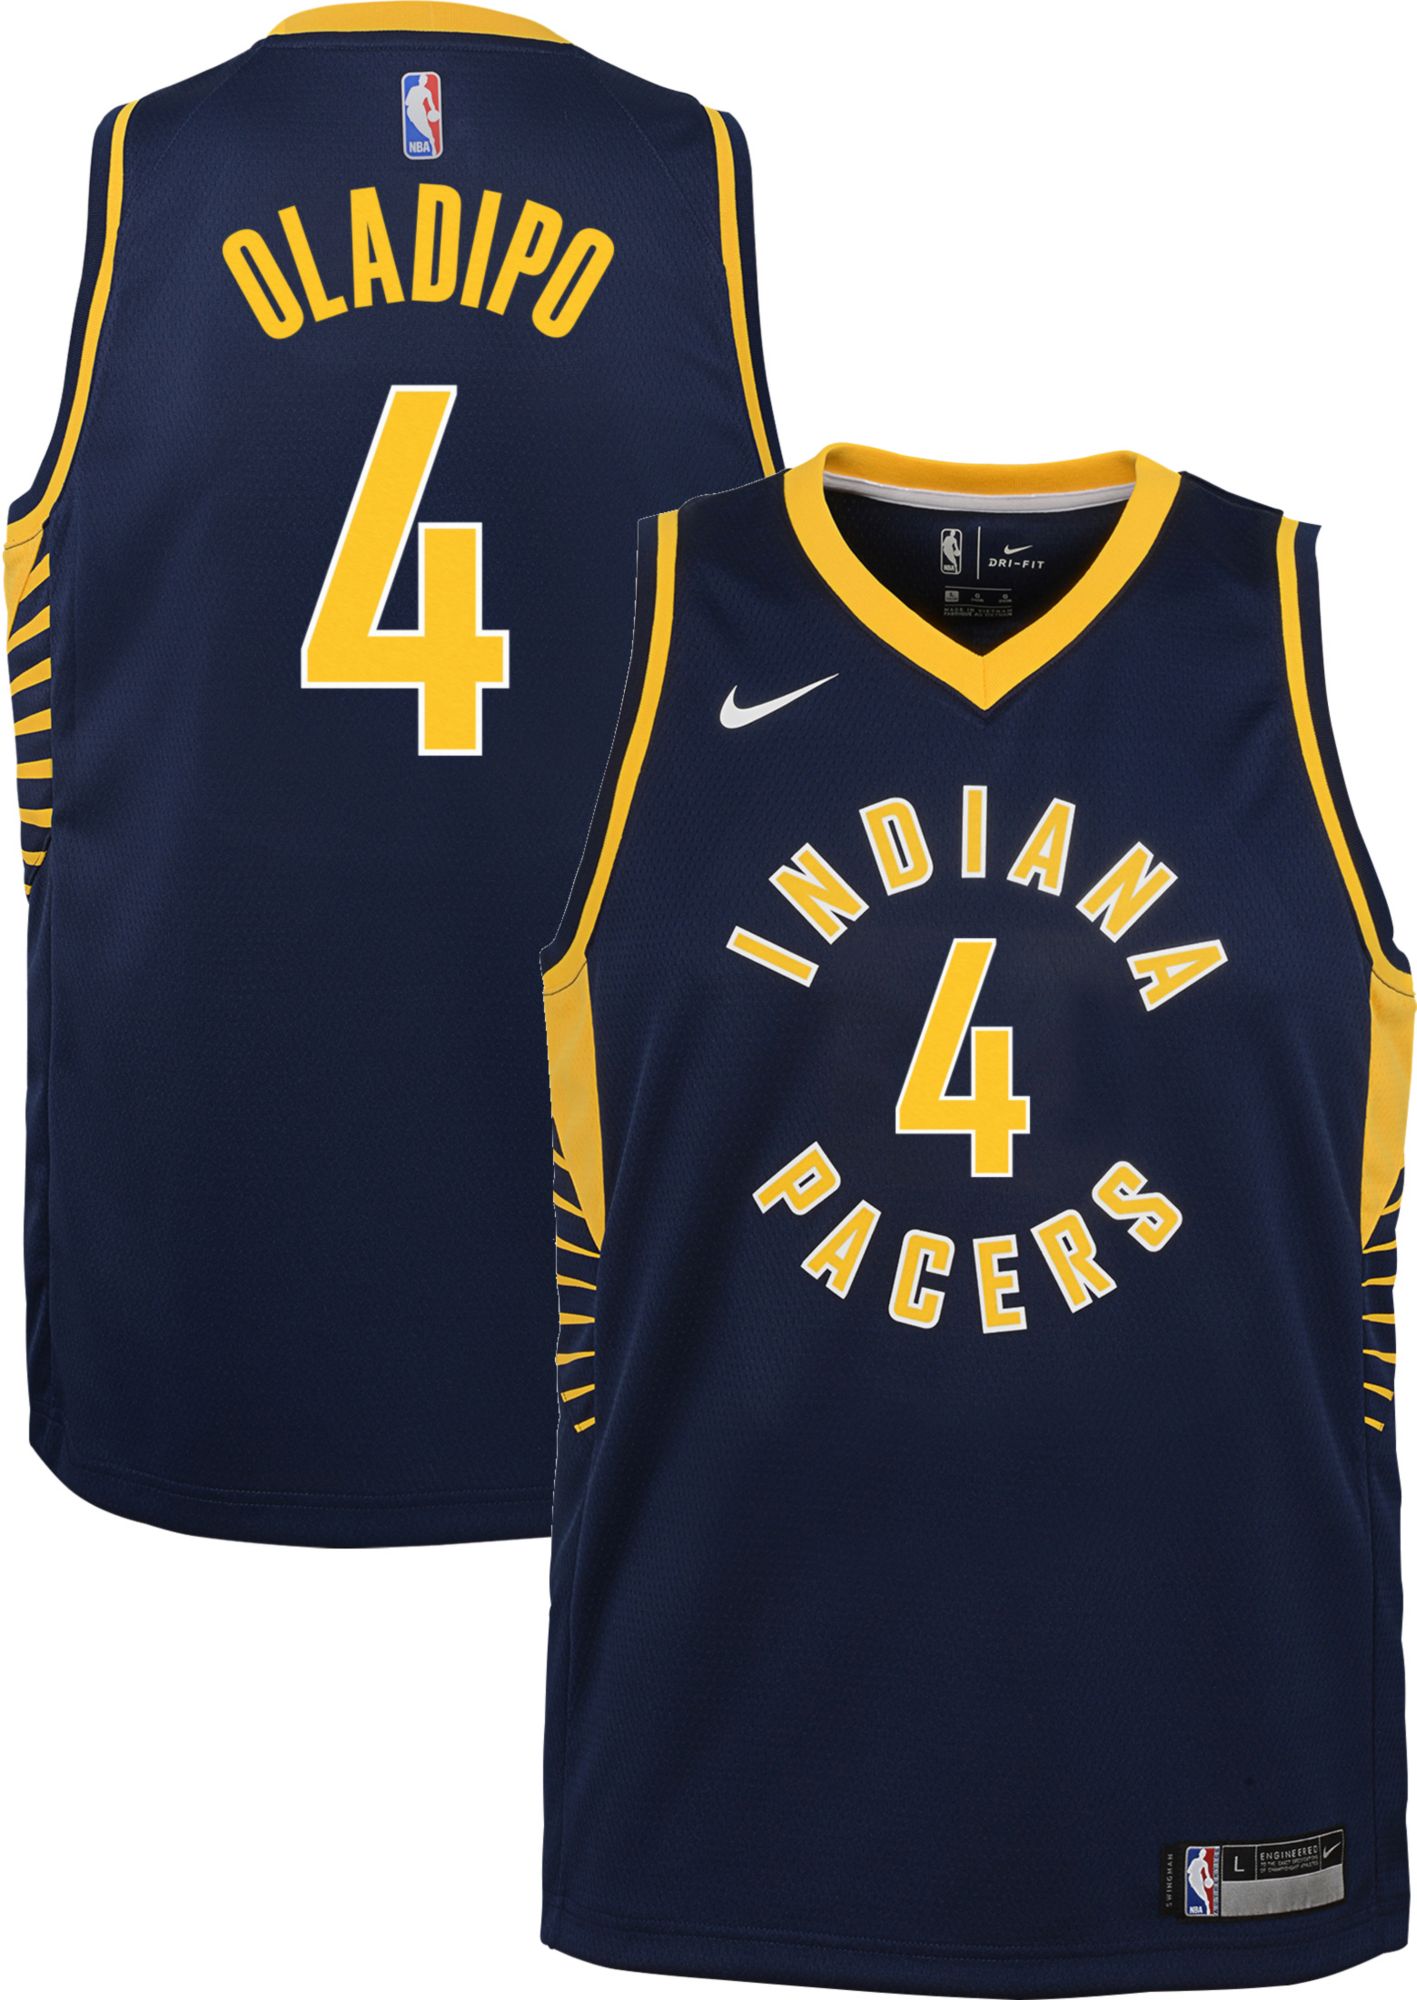 indiana pacers jersey up and down